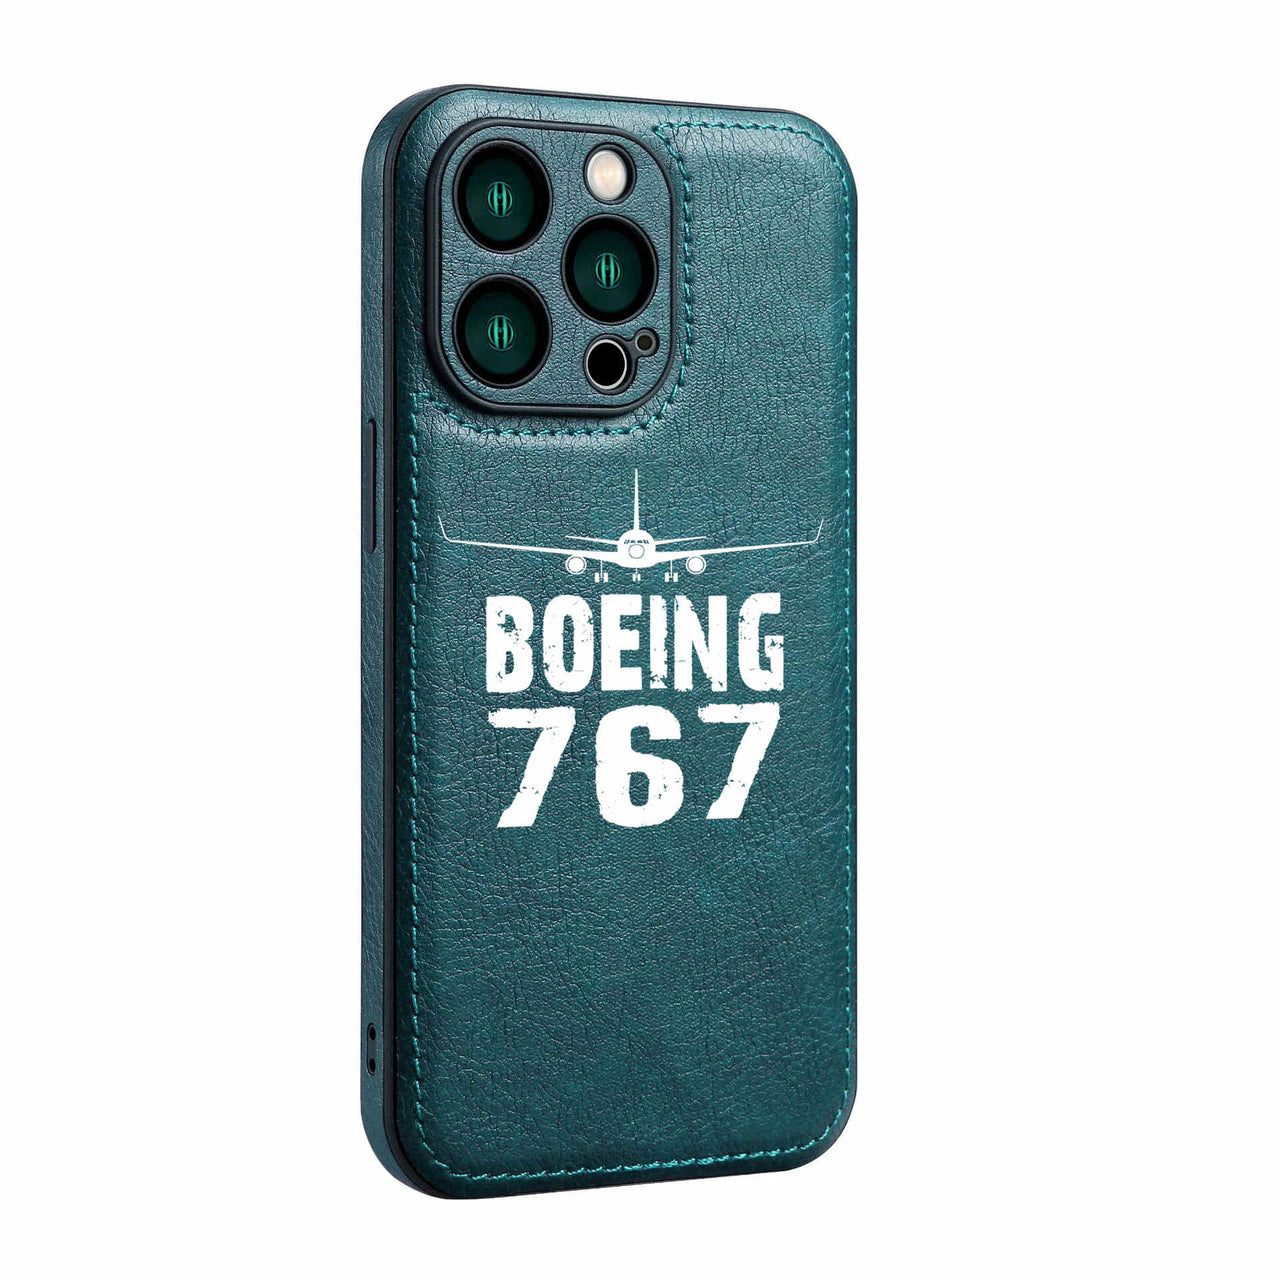 Boeing 767 & Plane Designed Leather iPhone Cases